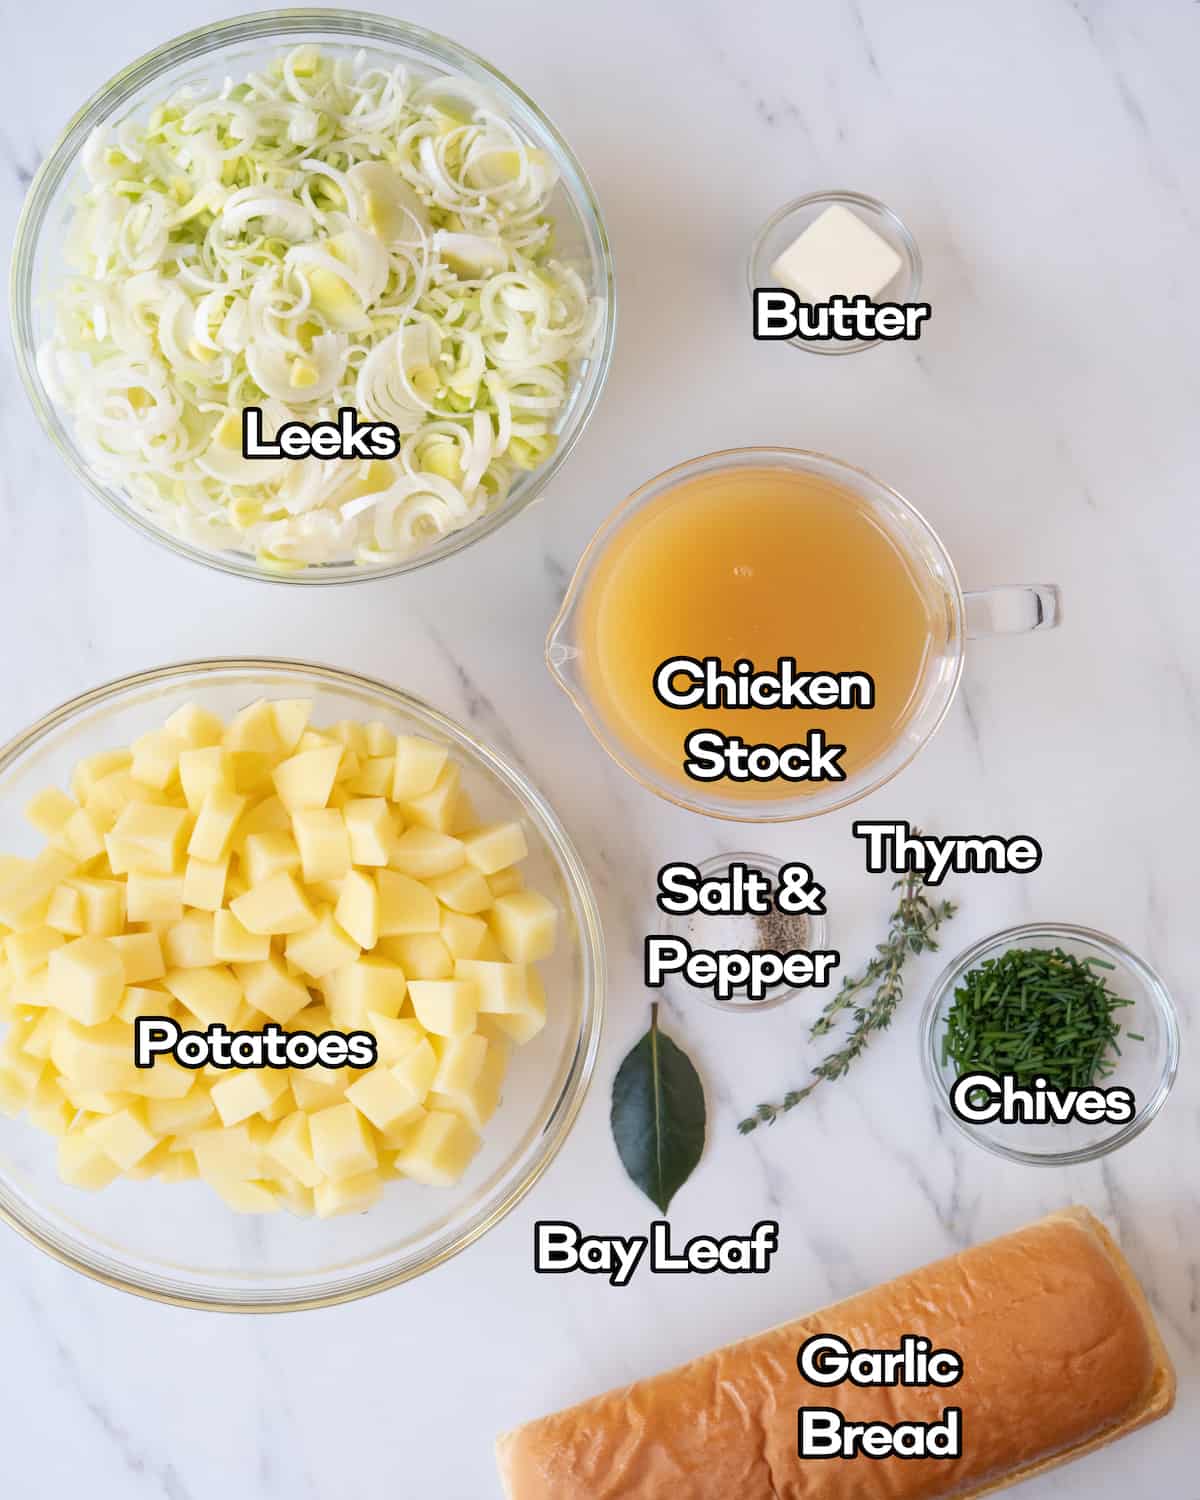 Ingredient shot of each individual ingredient in clear bowls including leeks, butter, potatoes, chicken stock, salt and pepper, chives, thyme, bay leaf, and garlic bread.